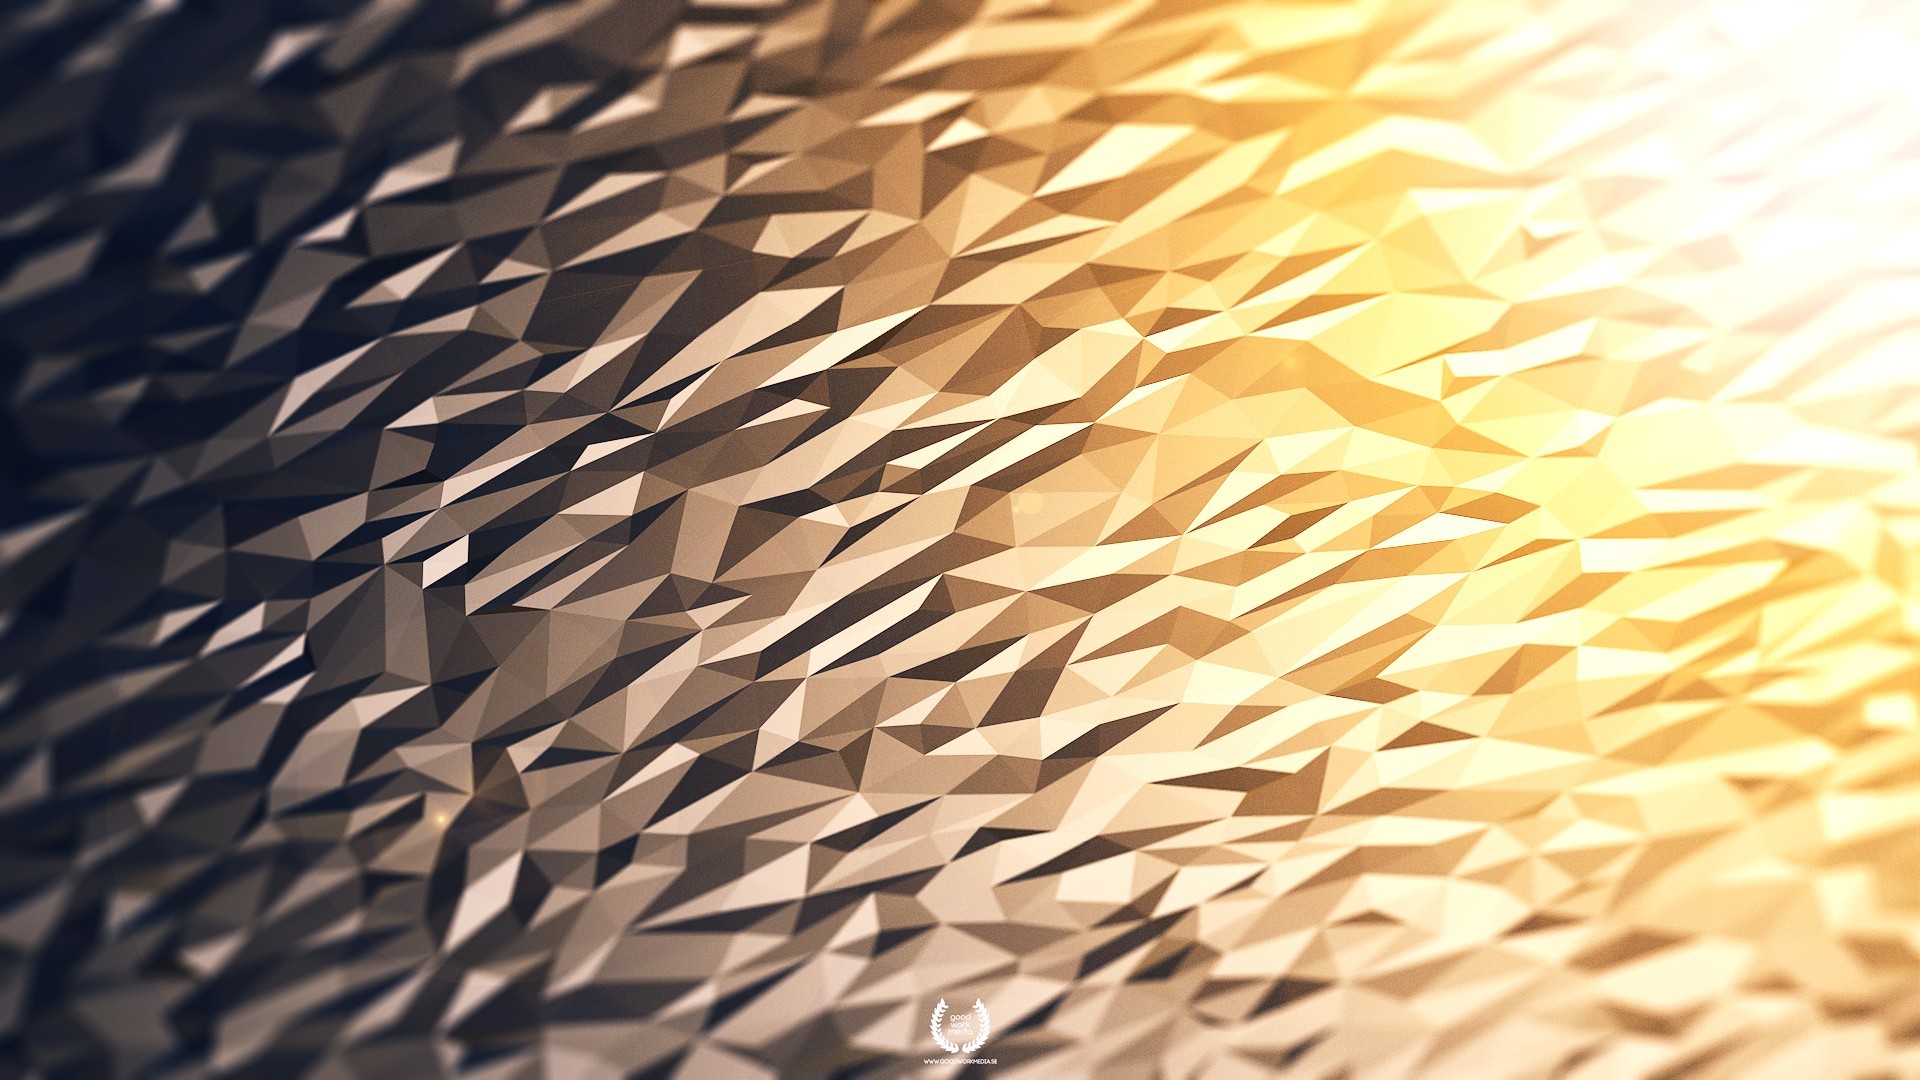 General 1920x1080 digital art CGI low poly abstract